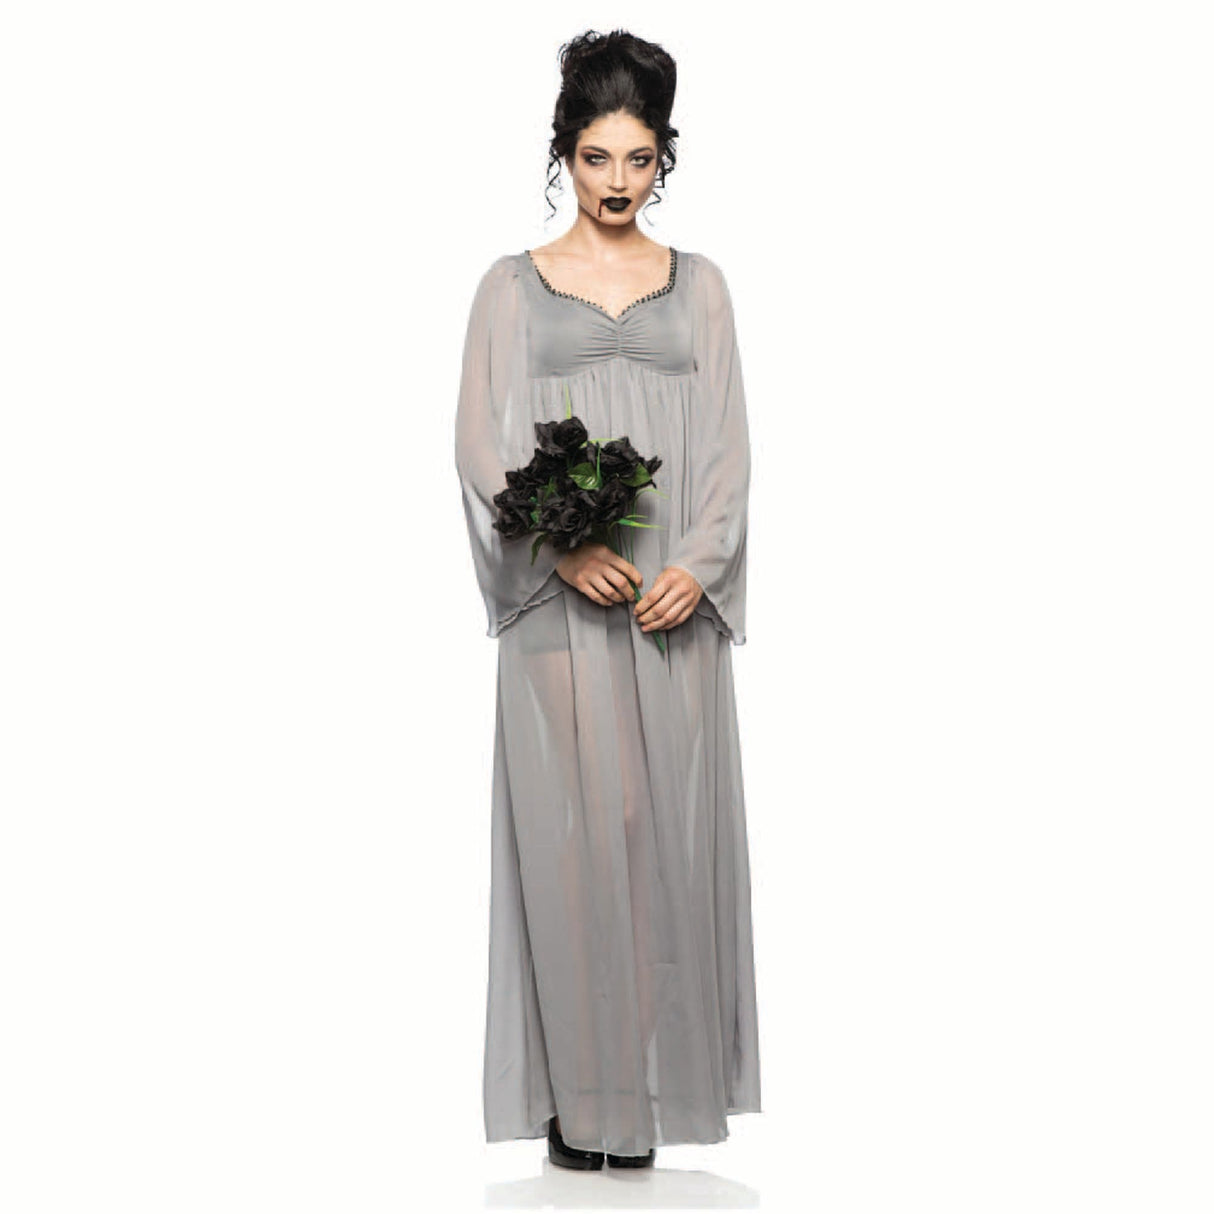 Seeing Red Inc. Costumes Vampire Bride Costume for Adults, Grey Dress